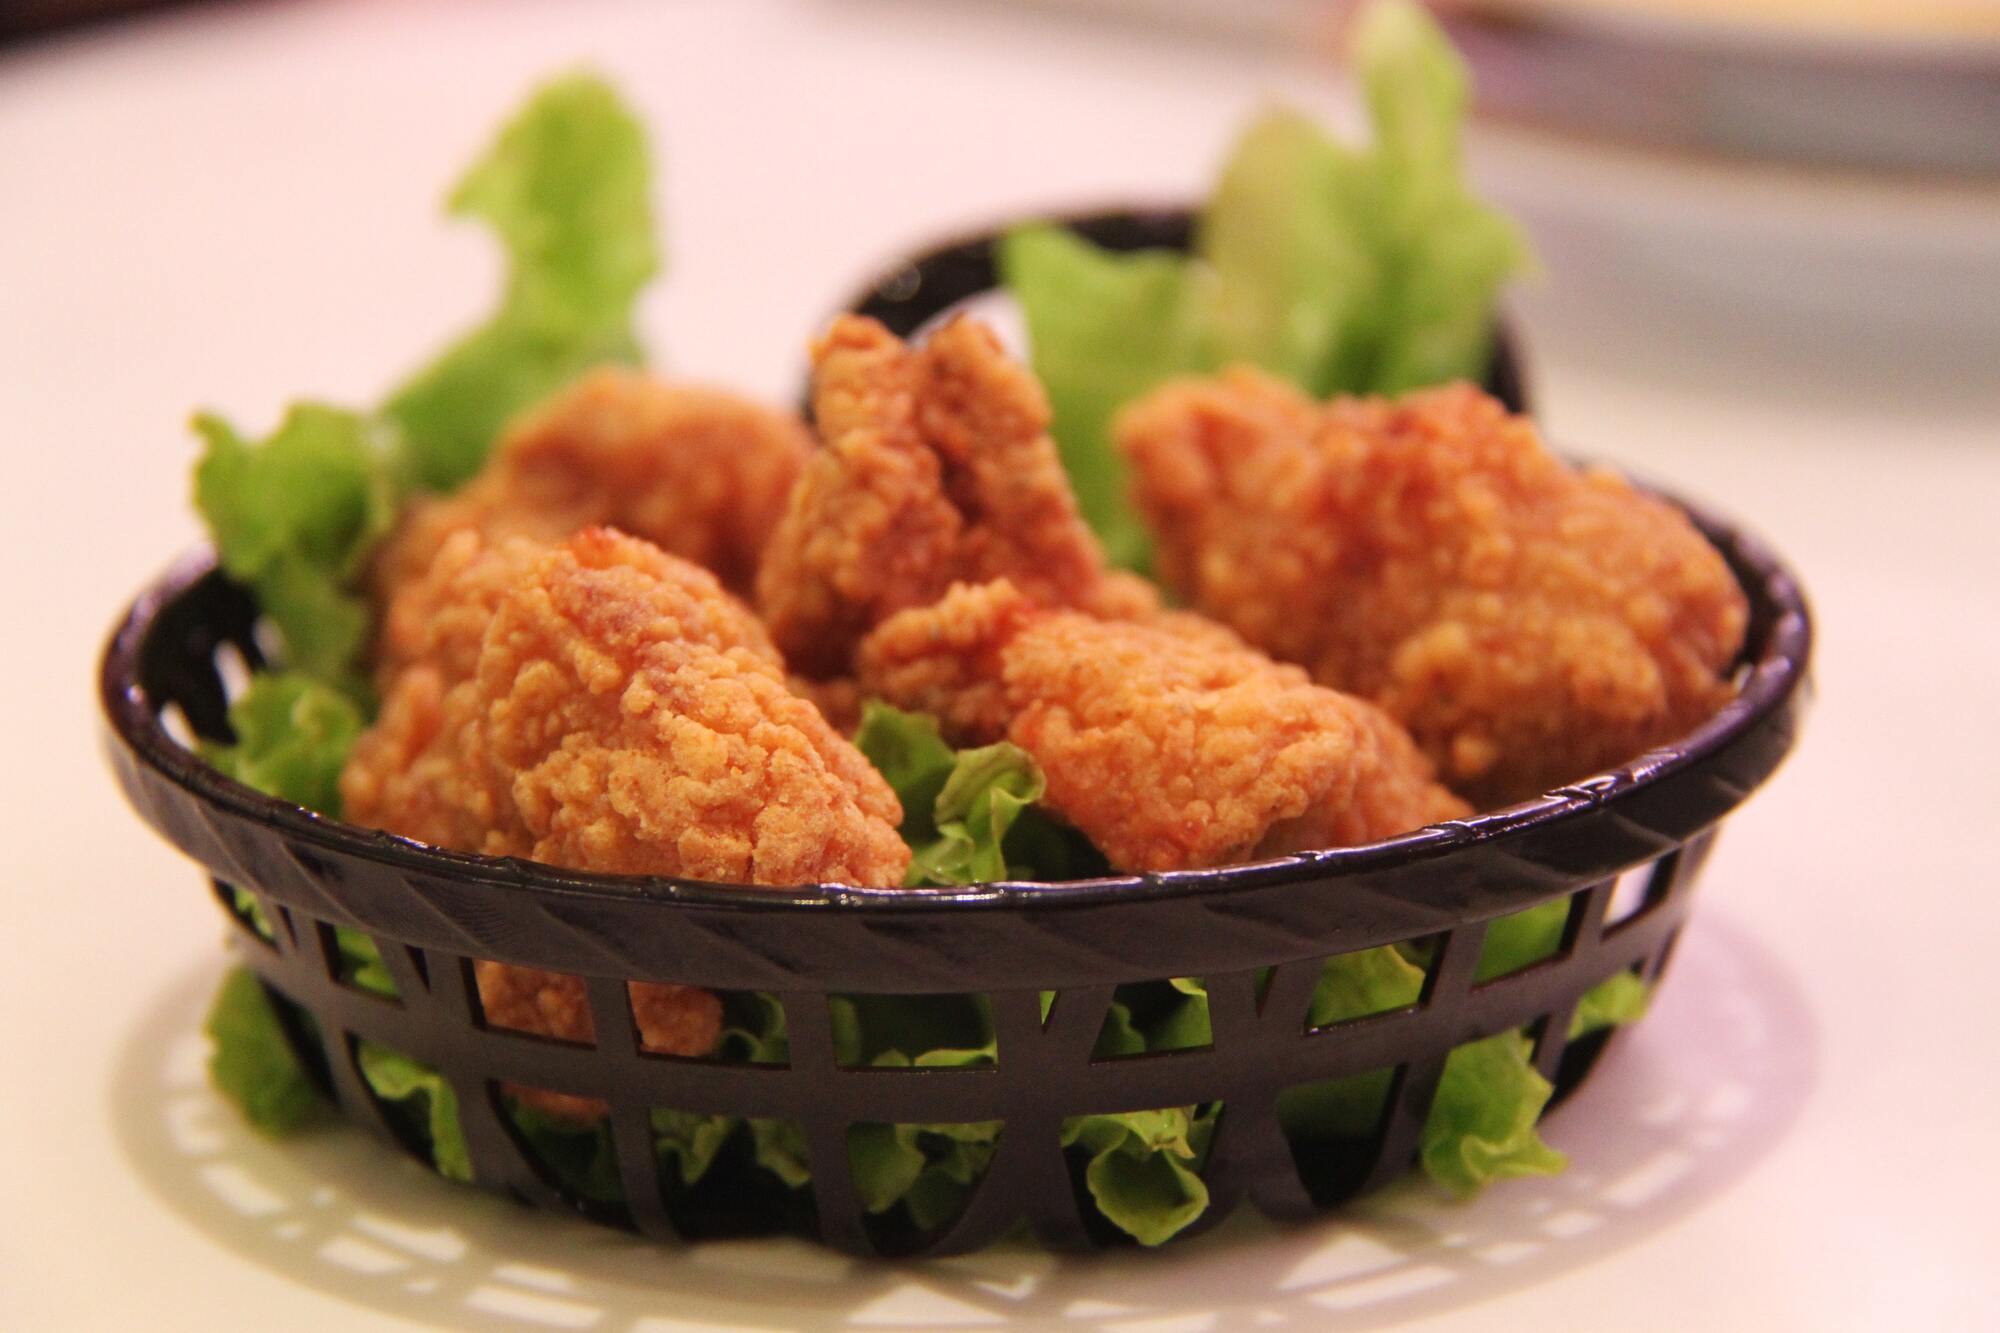 How to make delicious chicken nuggets at home